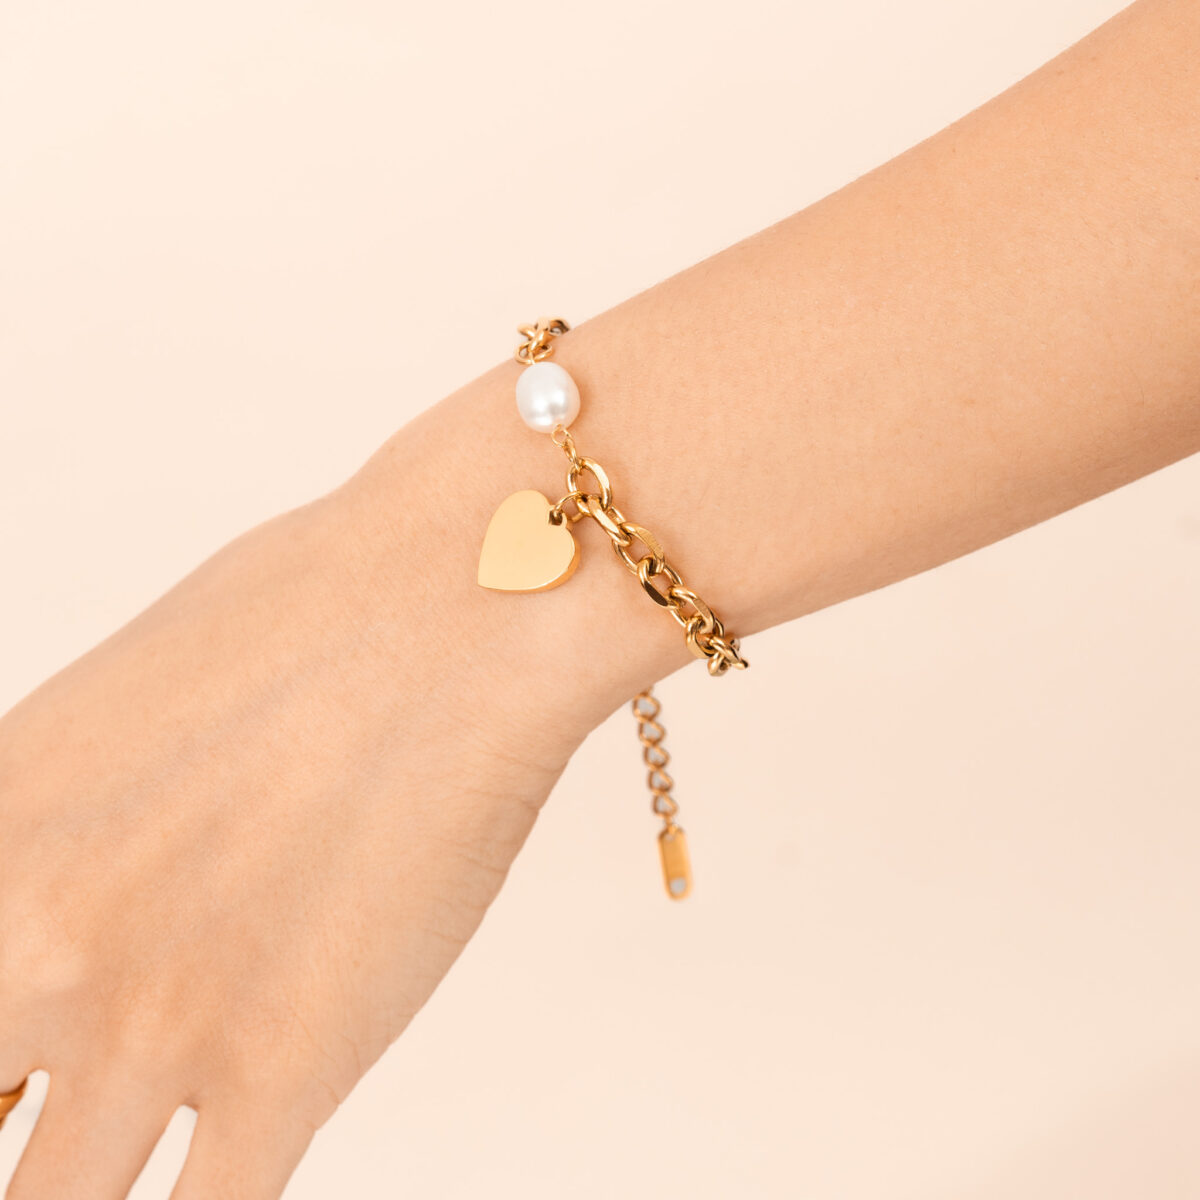 https://m.clubbella.co/product/agate-gold-heart-charm-bracelet/ Agate Gold Heart Charm Bracelet (6)